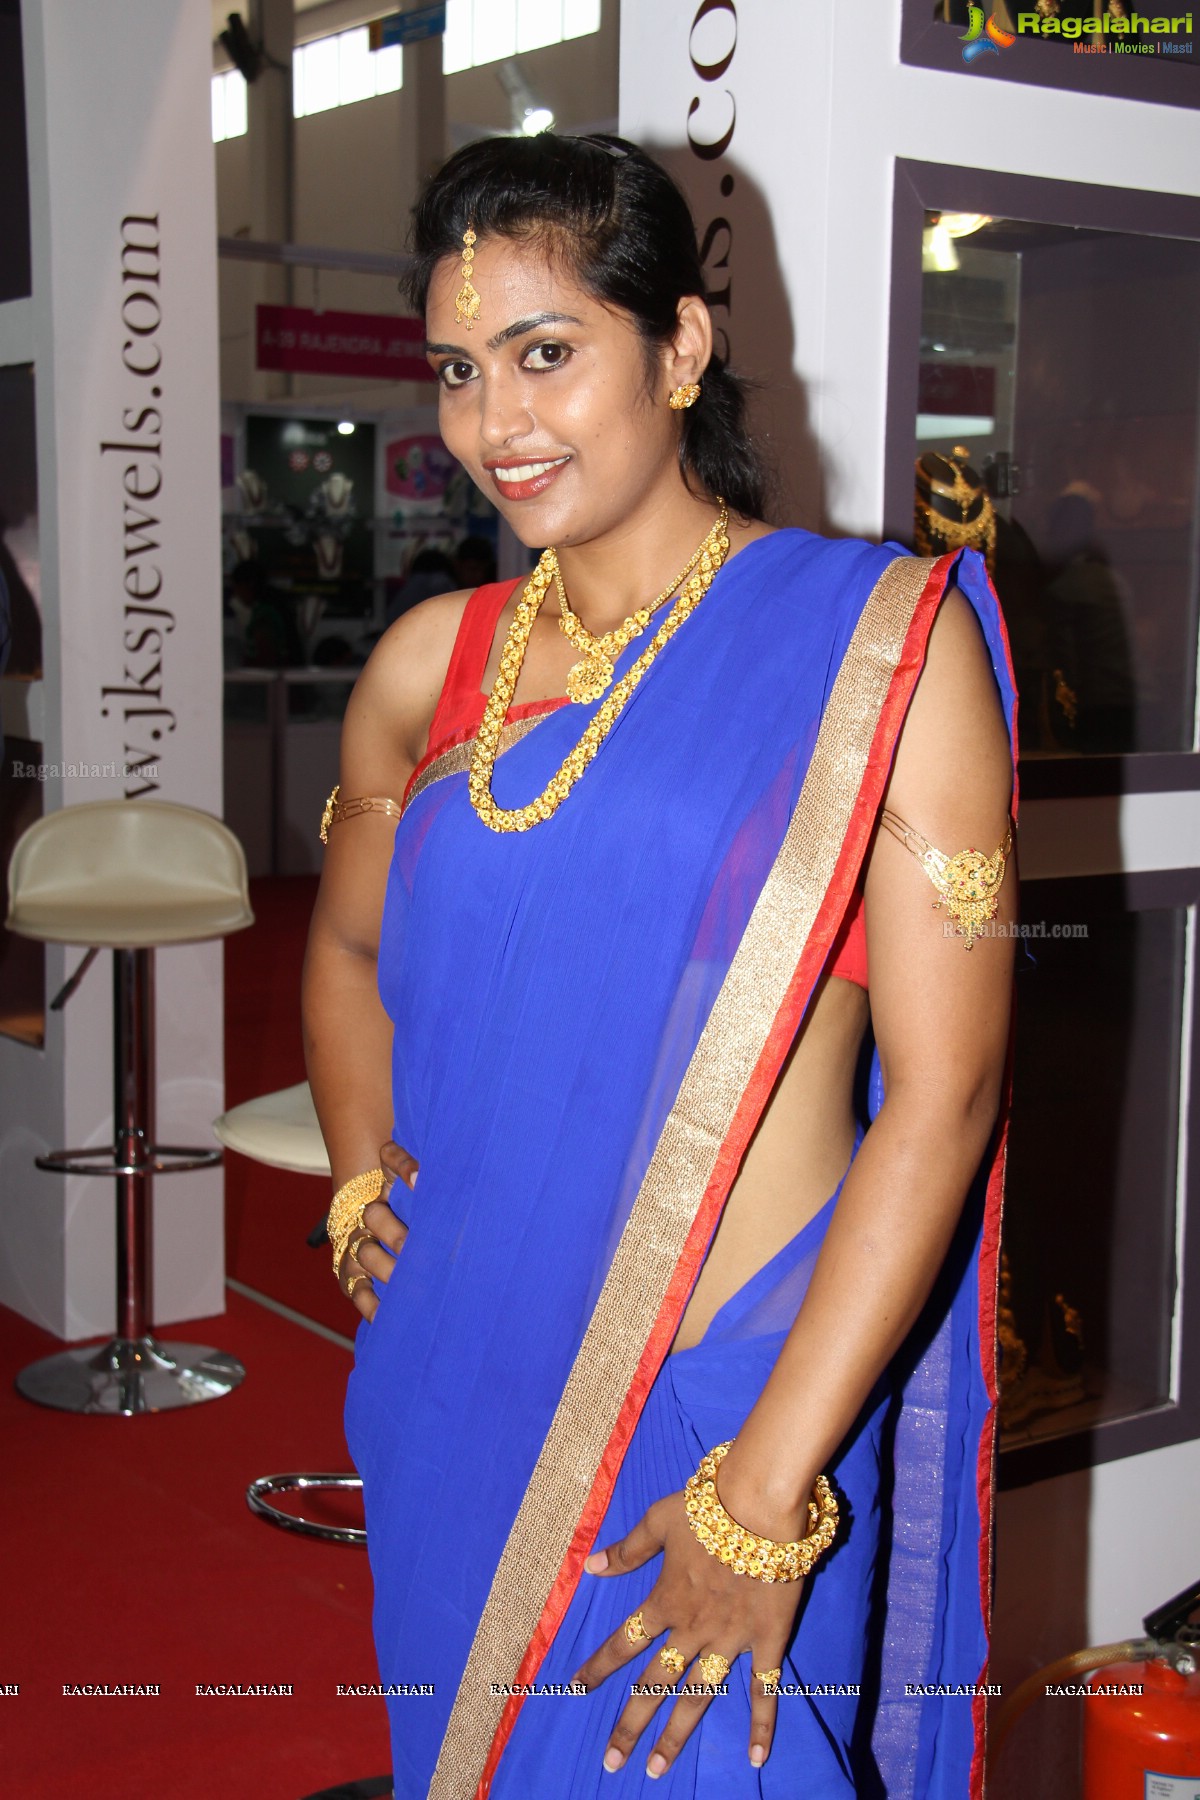 7th Edition of Hyderabad Jewellery Pearl and Gem Fair, Hyderabad